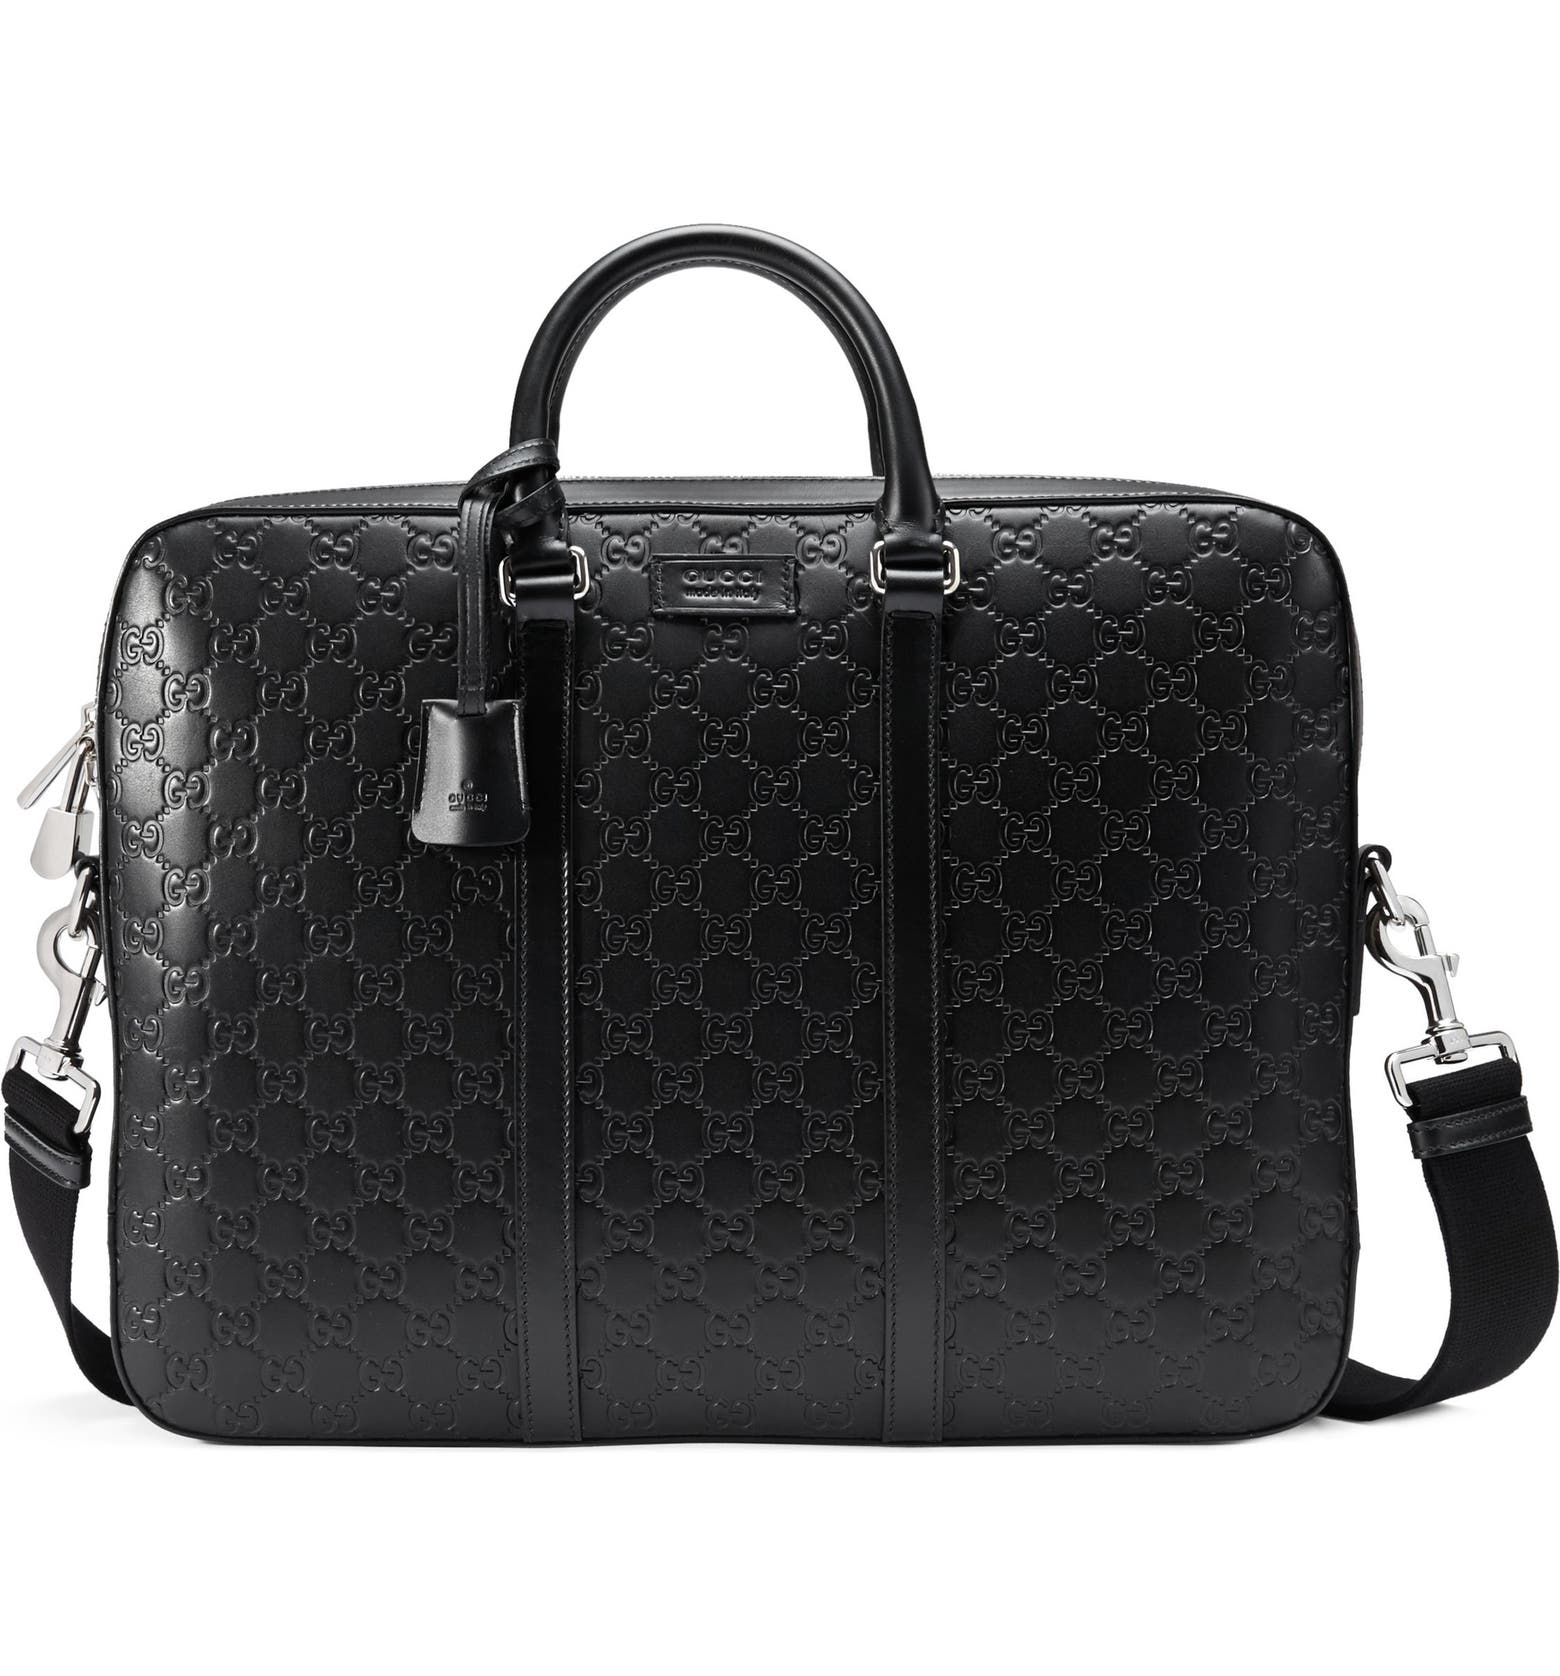 Gucci Signature Leather Briefcase | Nordstrom